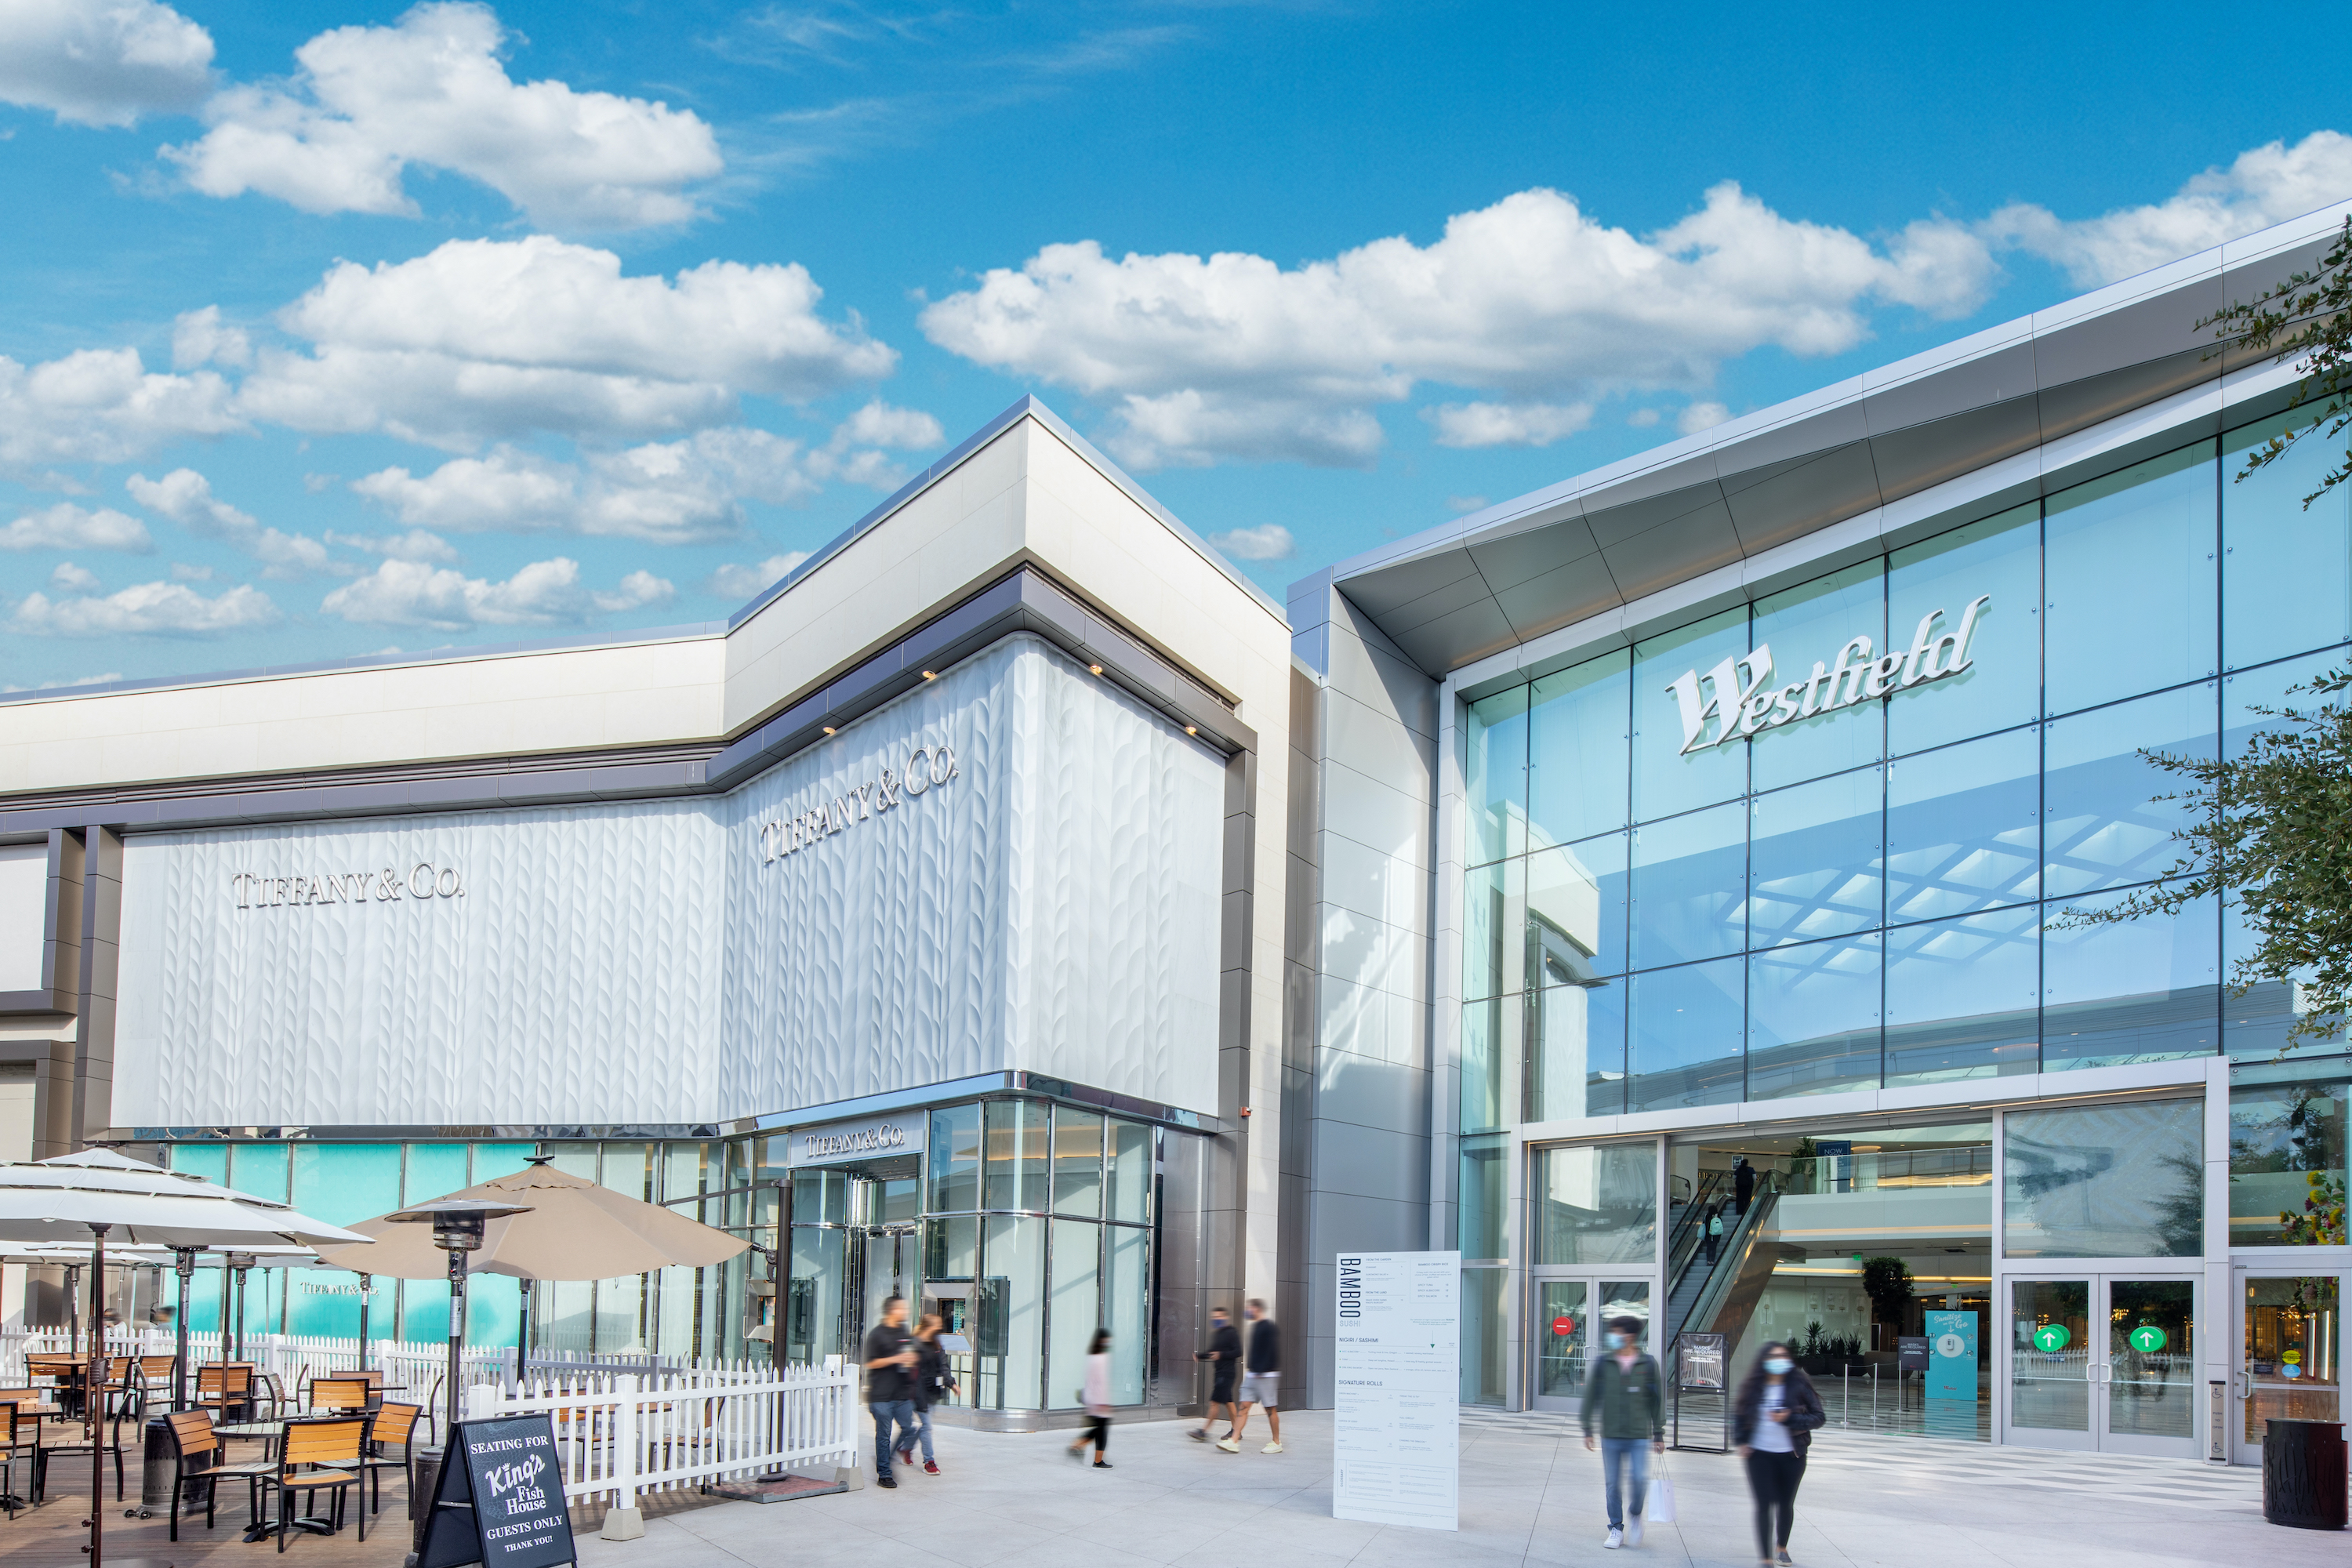 WESTFIELD VALLEY FAIR OPENS MORE THAN 40 NEW STORES AND